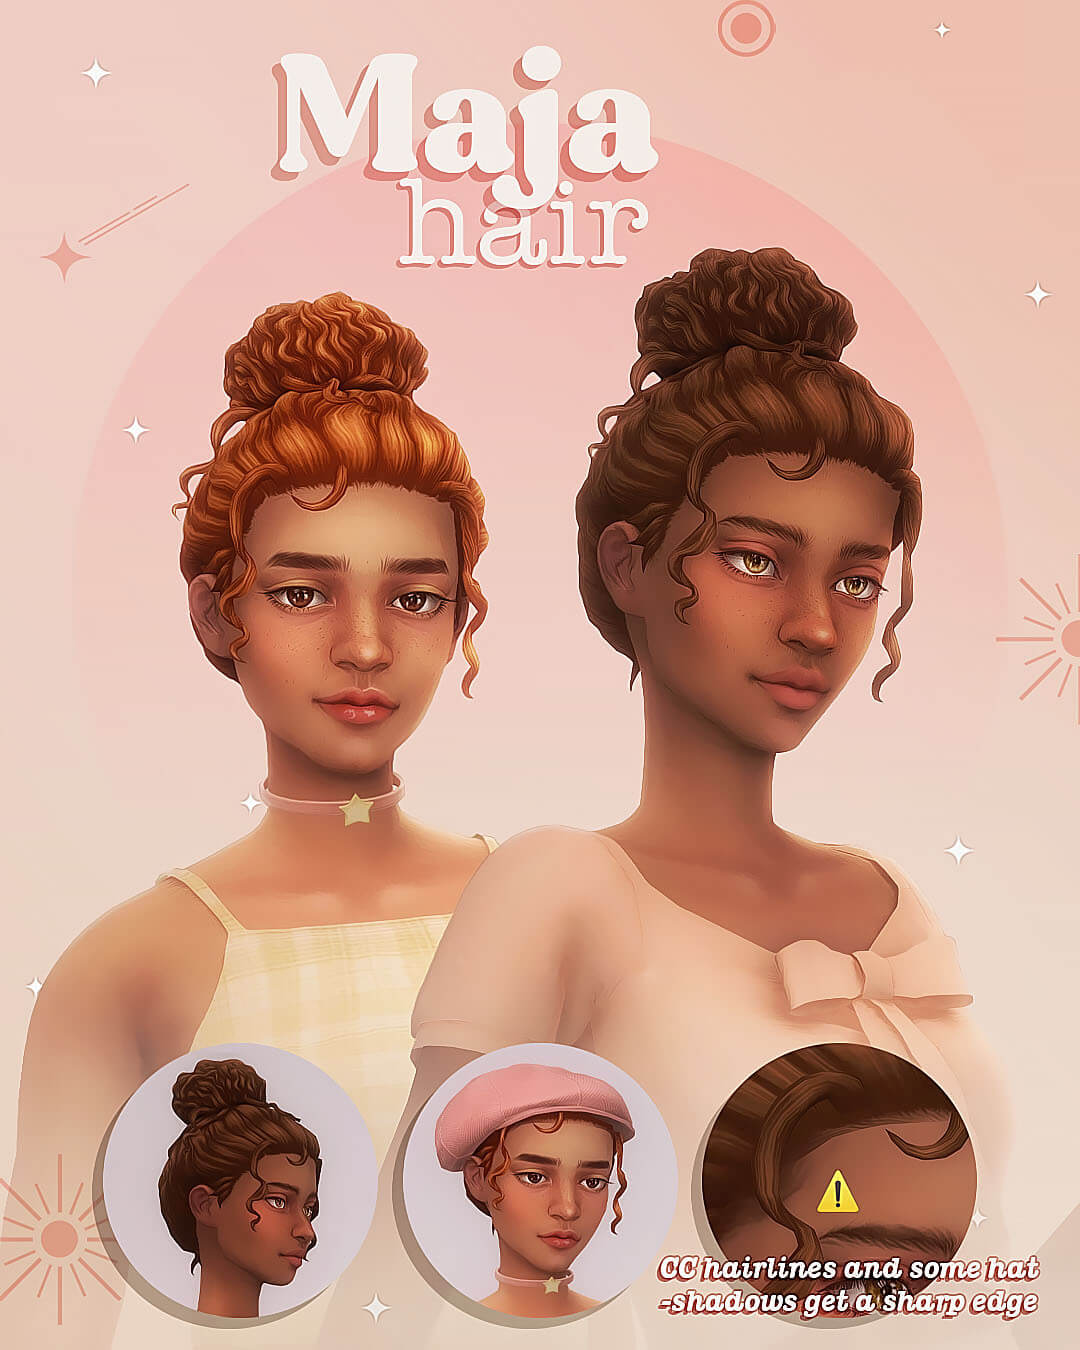 maxis match the sims 4